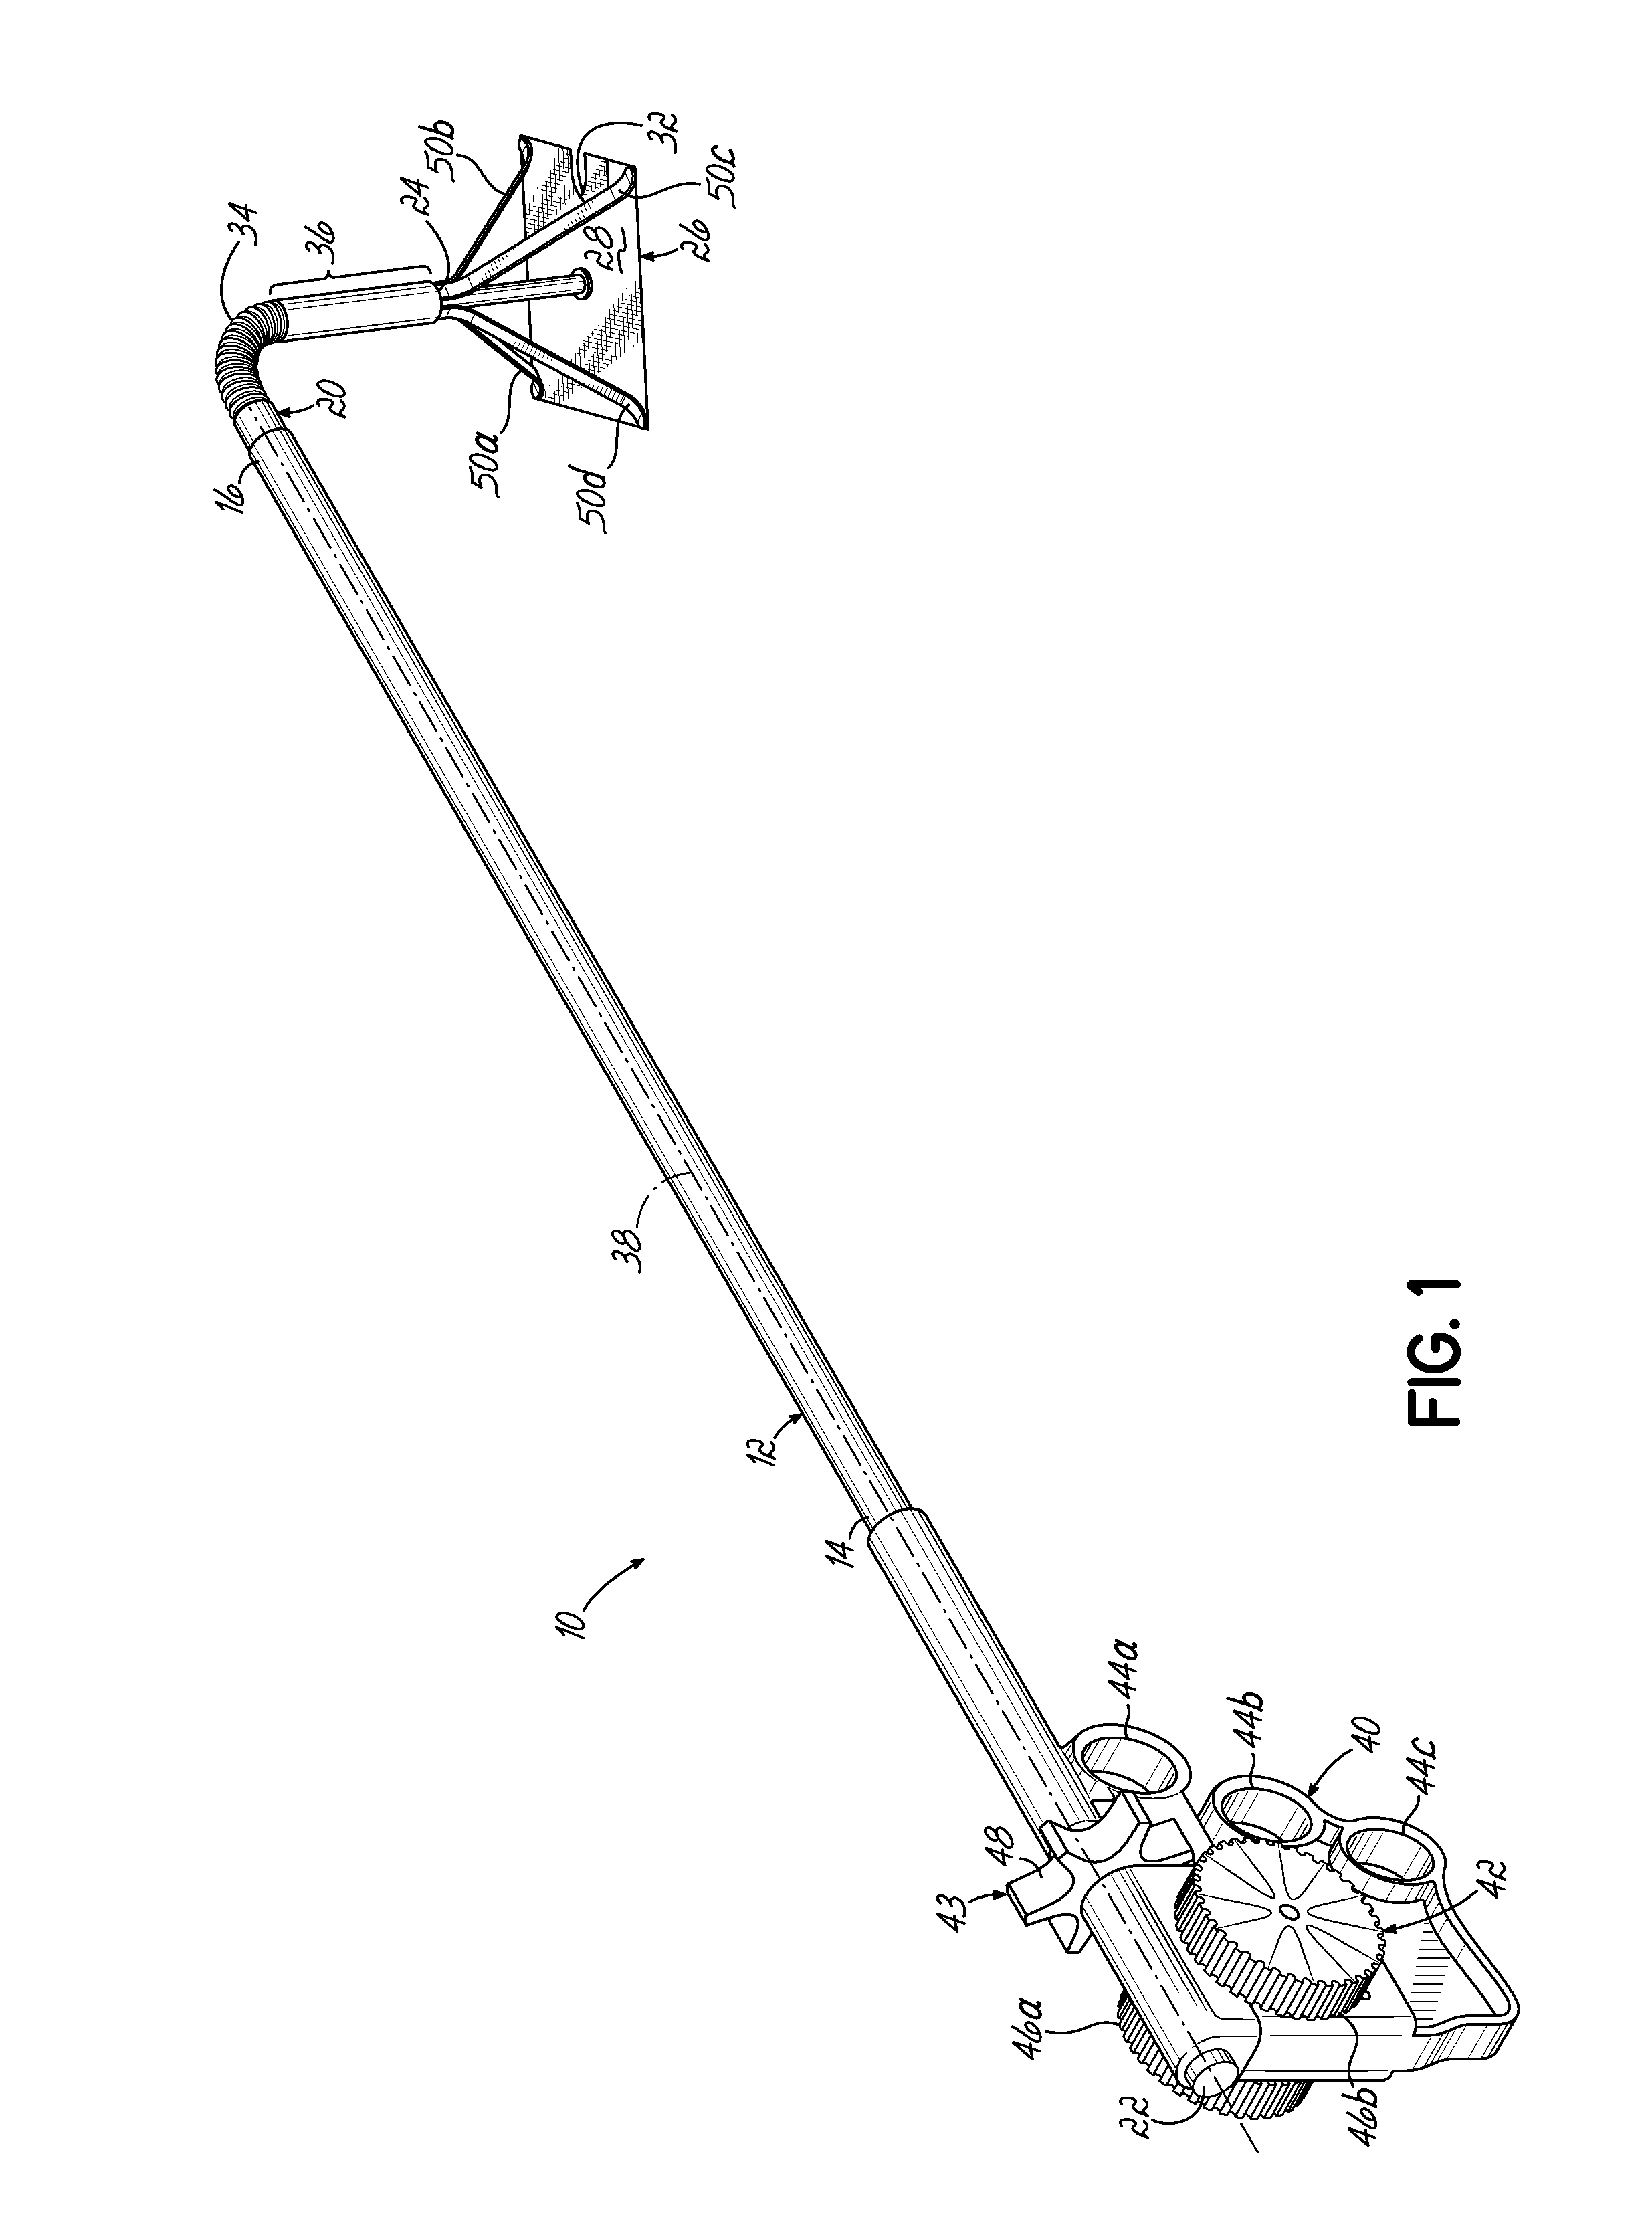 Instrument and method for delivery, deployment, and tamponade of hemostats and methods of assembling an instrument therefor